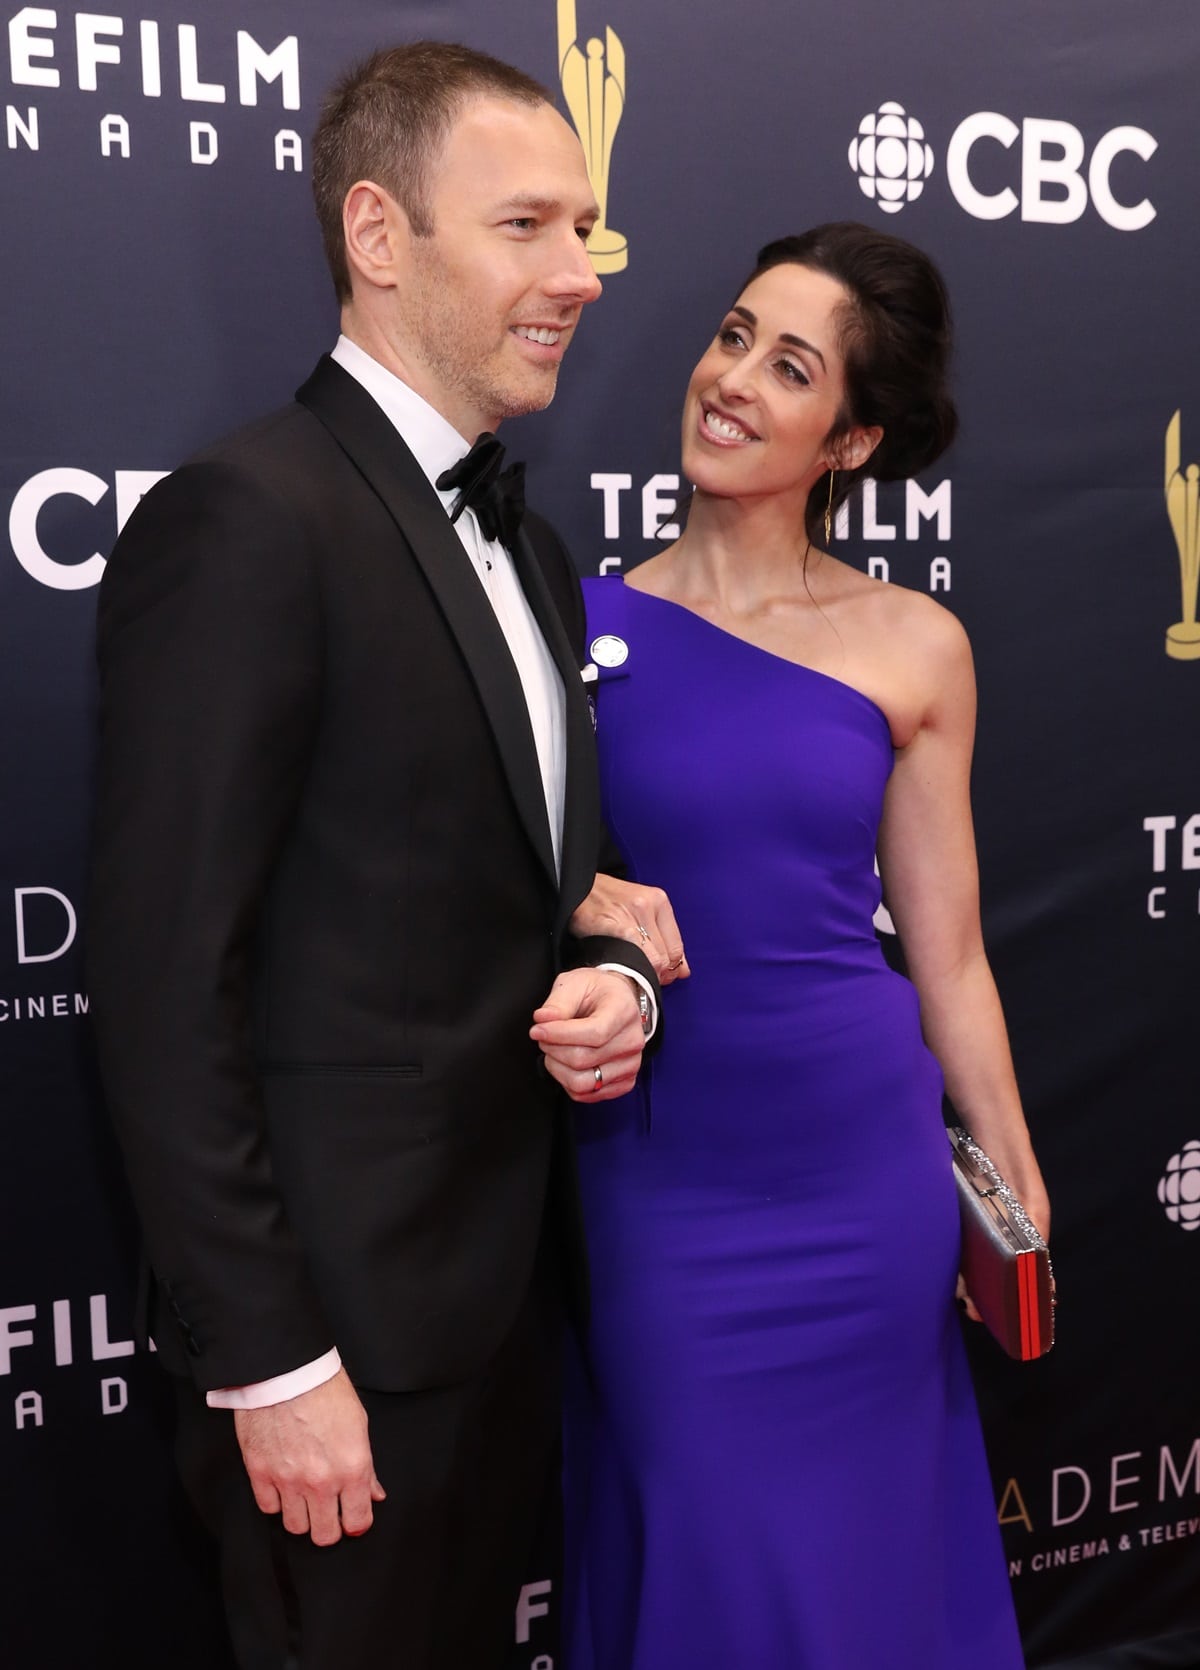 Philip Sternberg planned an elaborate and unforgettable proposal that Catherine Reitman declared that saying yes to him was “the smartest move” she’s ever made